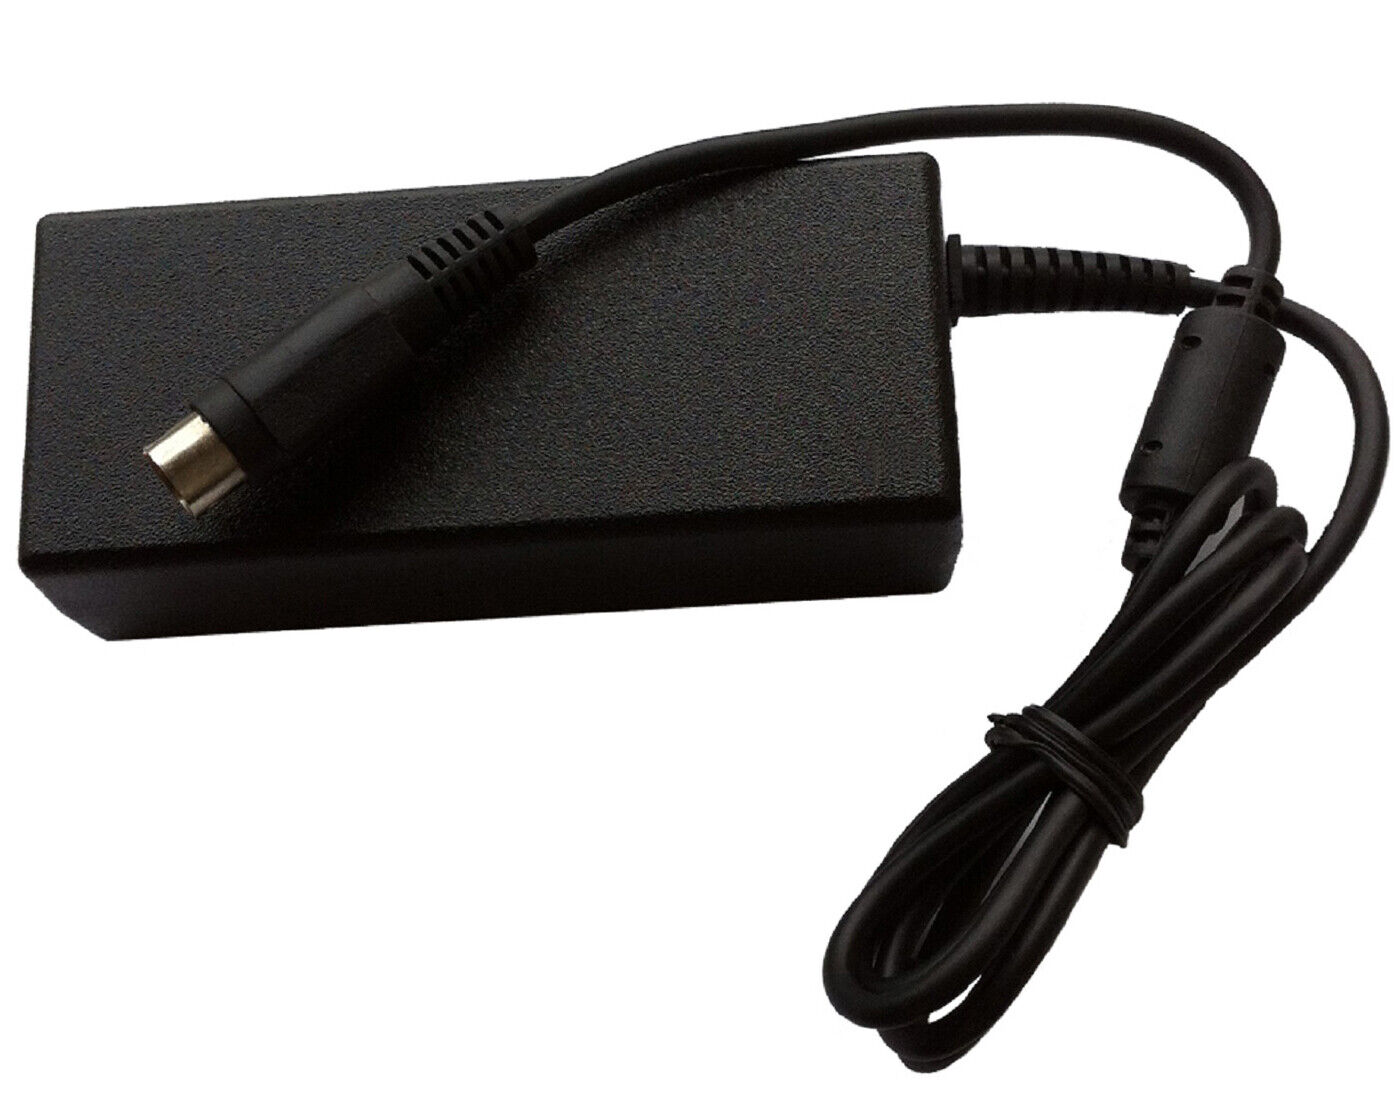 6-Pin AC Adapter For RS # RS-1203/0503-S335 RS-12030503-S335 12V 5V Power Supply Connection Split/Duplication 1:2 Type - Click Image to Close